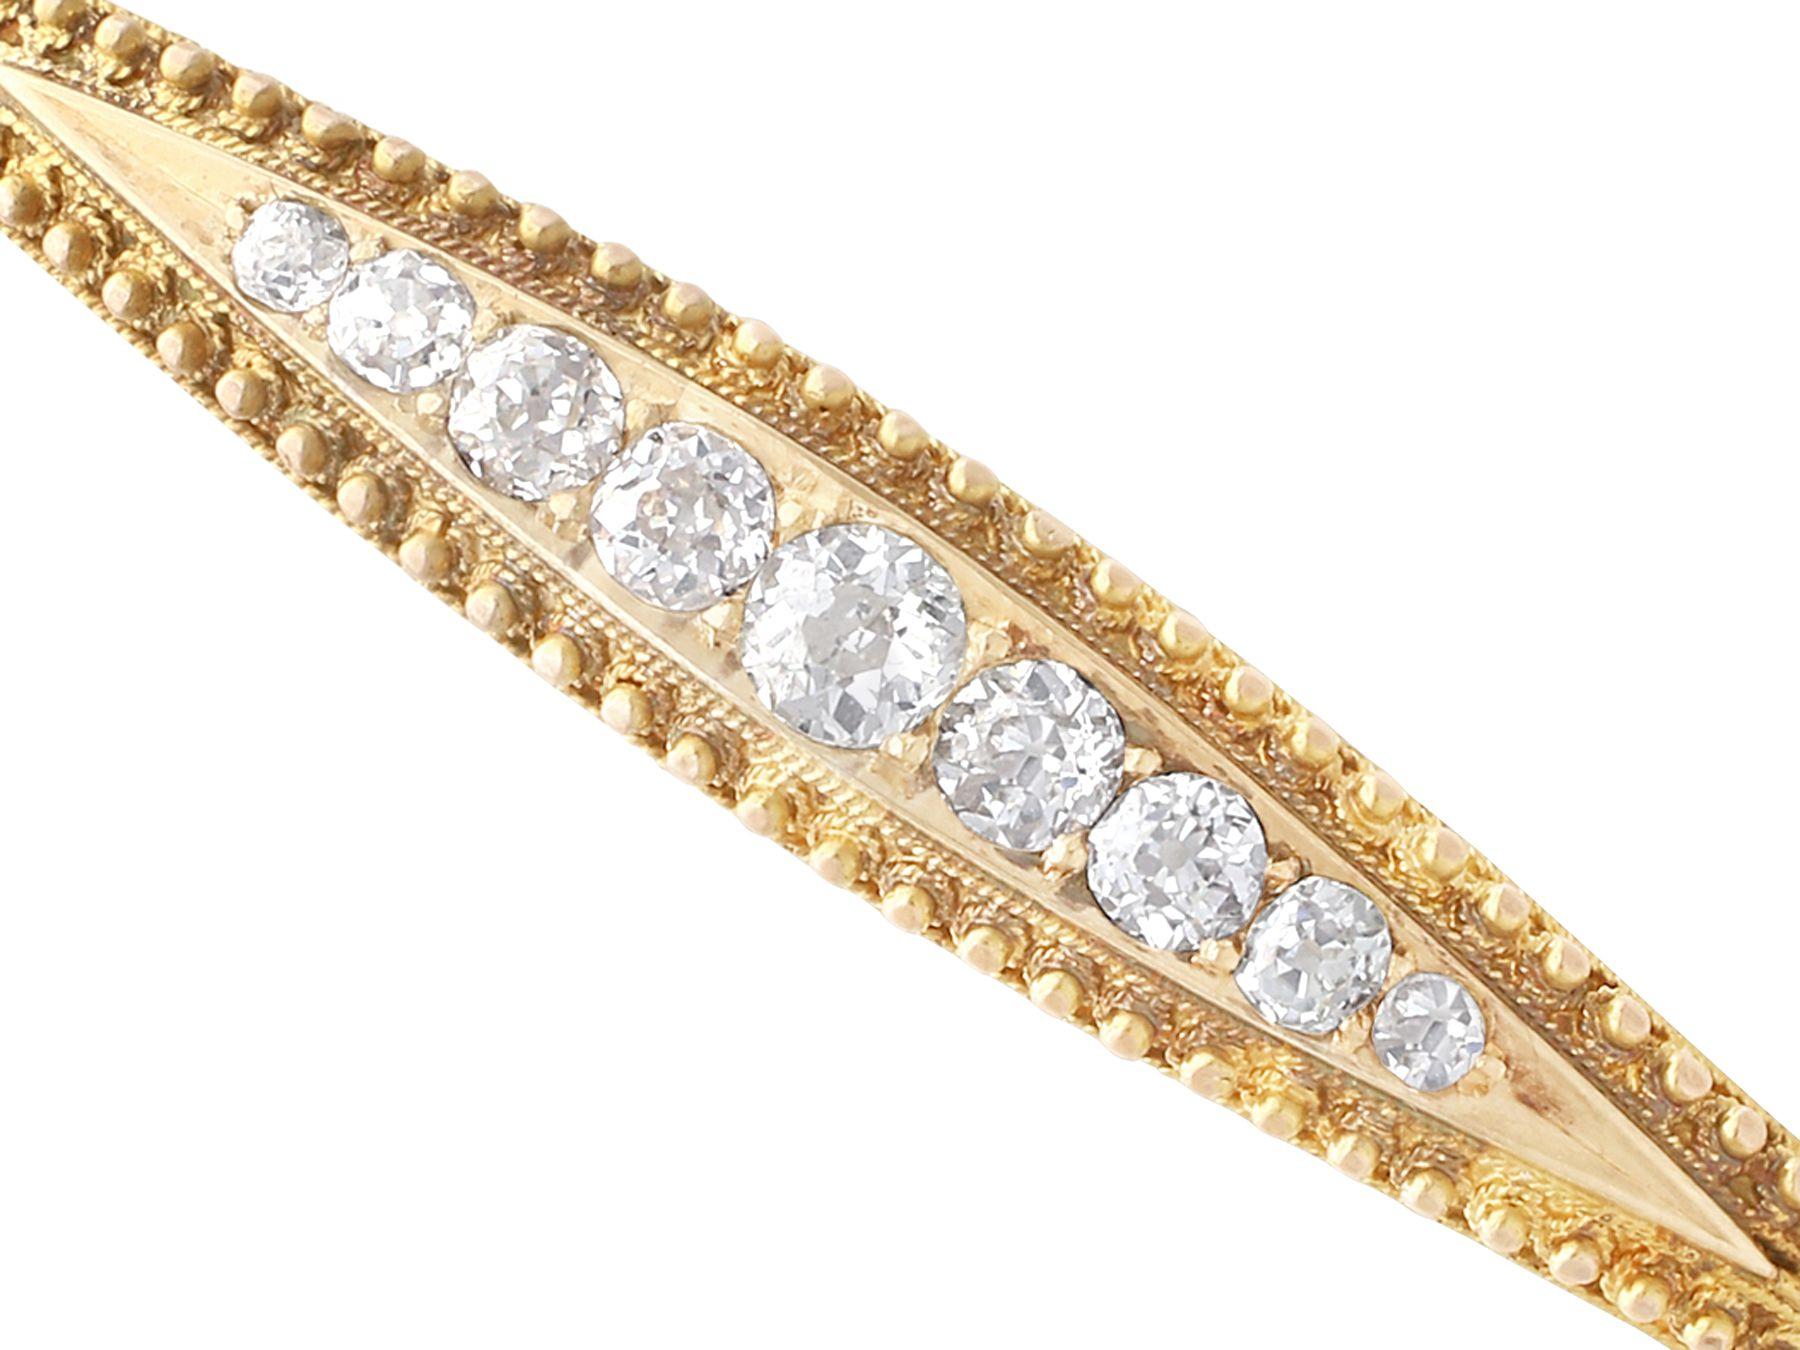 A fine and impressive antique Victorian 1.22 carat diamond and 15 karat yellow gold bangle; part of our diverse antique jewelry and estate jewelry collections.

This fine and impressive Victorian diamond bangle has been crafted in 15k yellow gold.